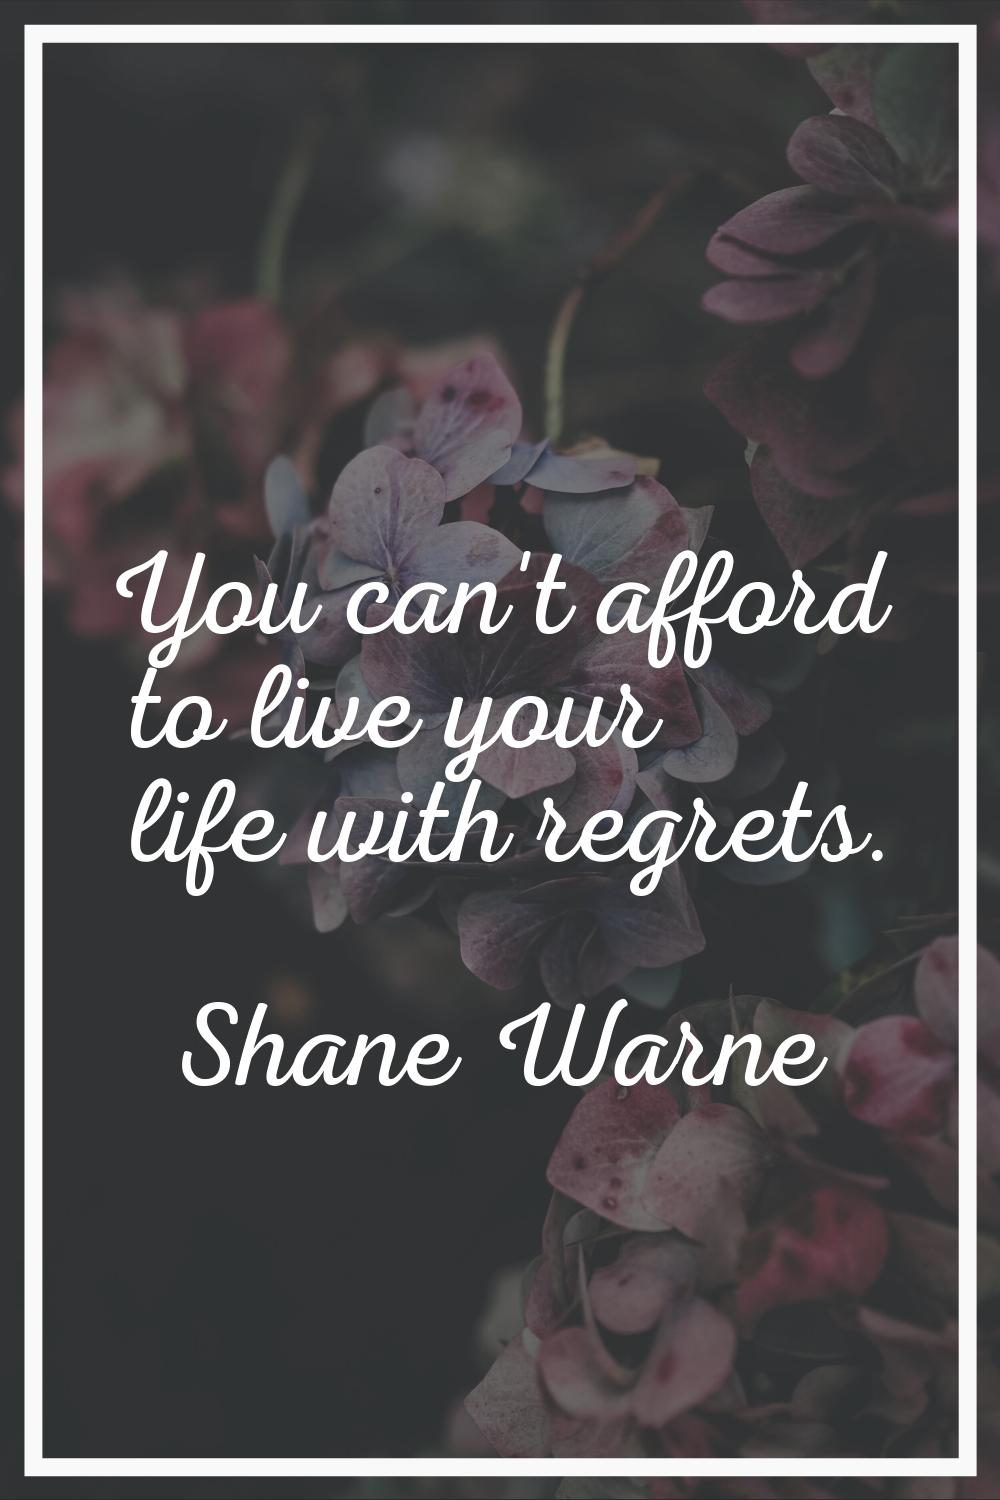 You can't afford to live your life with regrets.